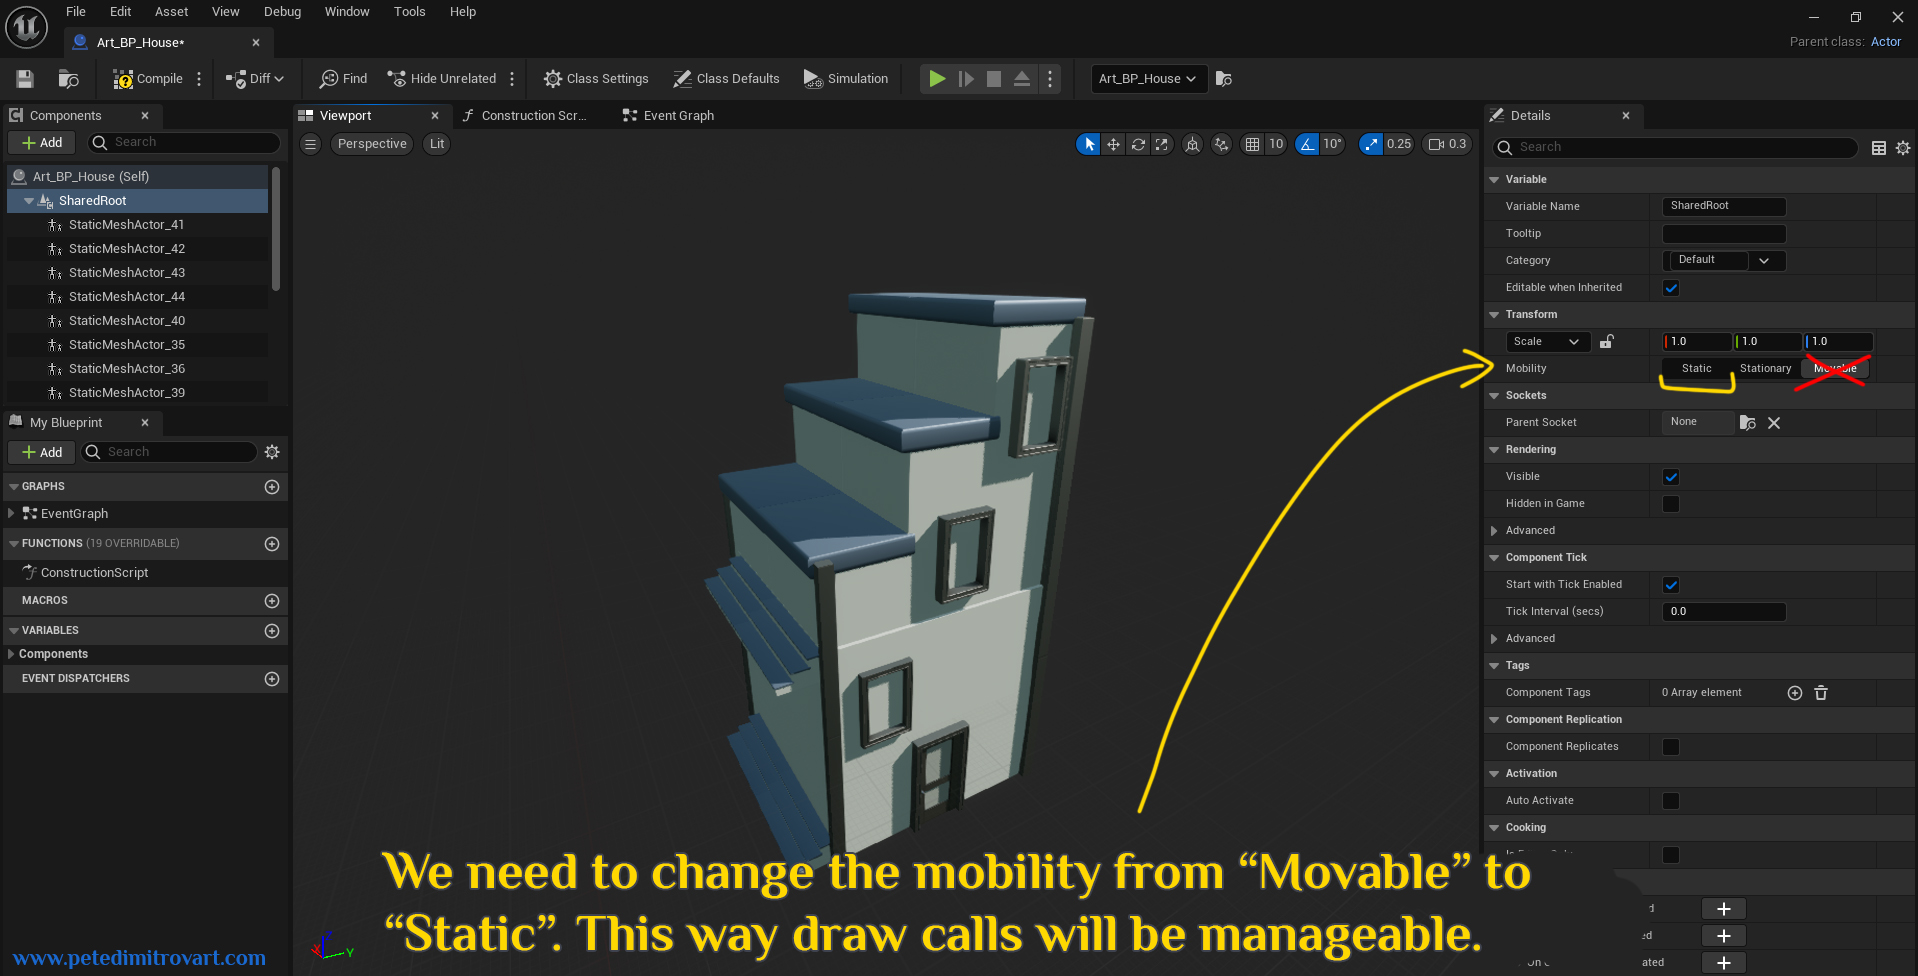 Identical to before UE5 blueprint editor screenshot. An orange arrow points to “Mobility” and crosses over “Movable”, explains that “Static” is the correct one. The text is described in the next paragraph.